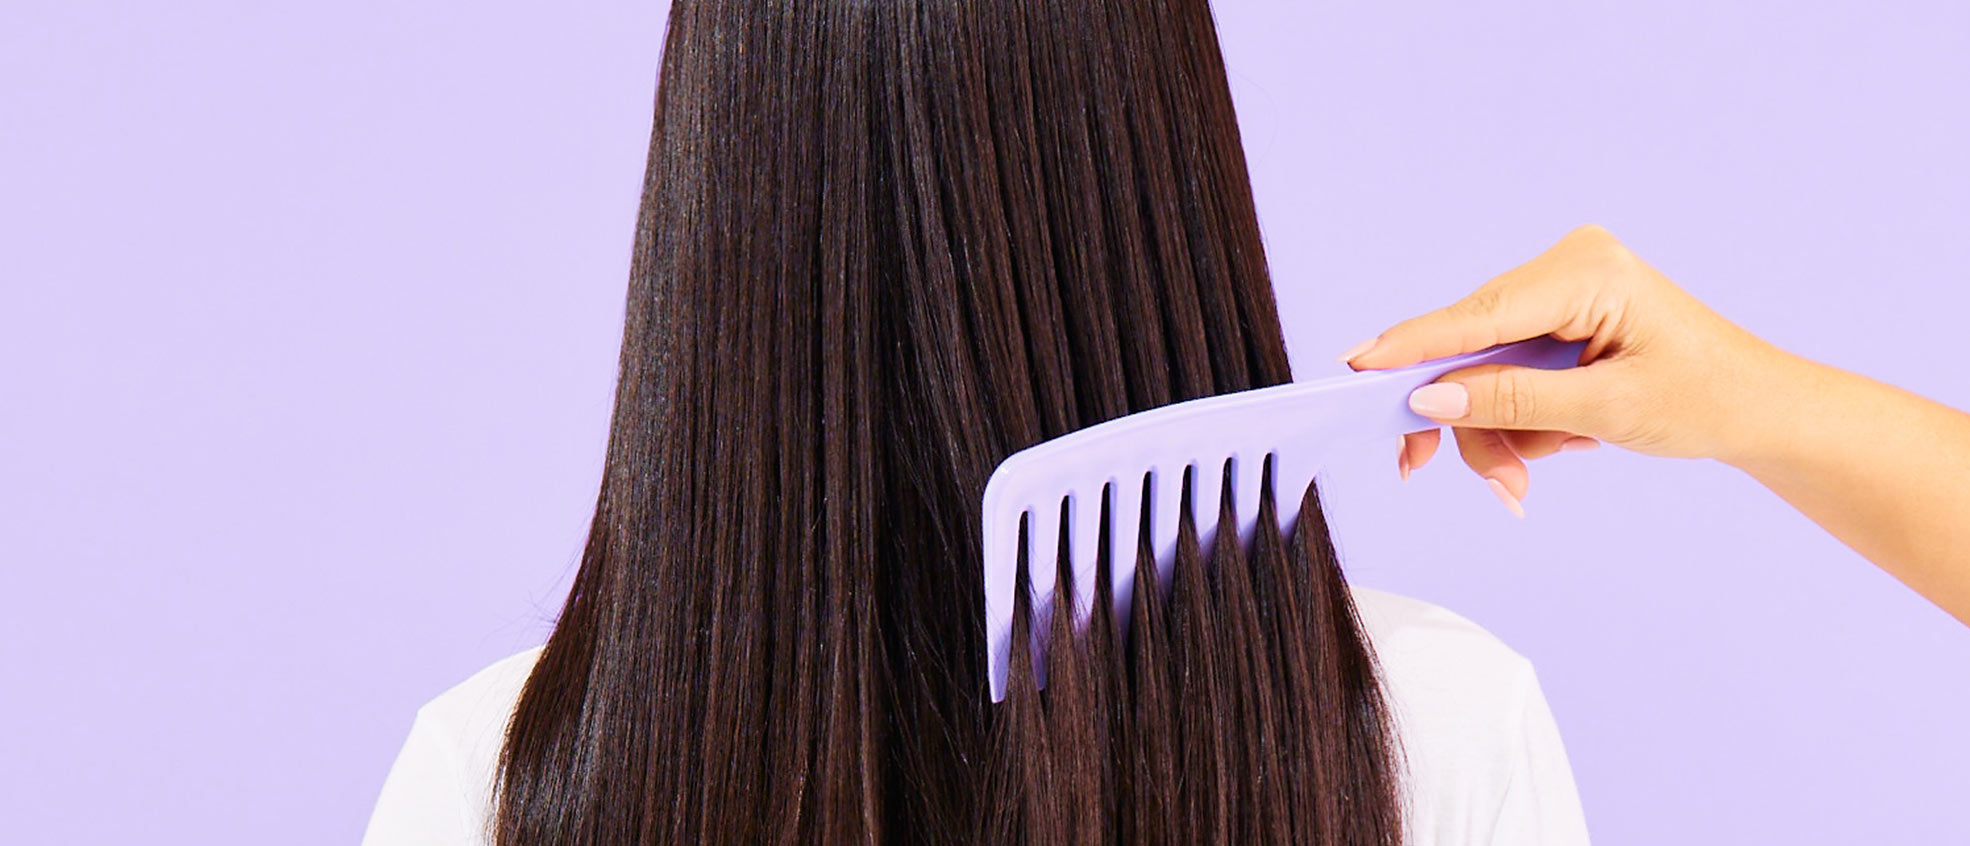 Image shows a woman's back head with brunette hair being combed vertically by another woman’s hand. Subject poses in front of a lavender color 
      background.